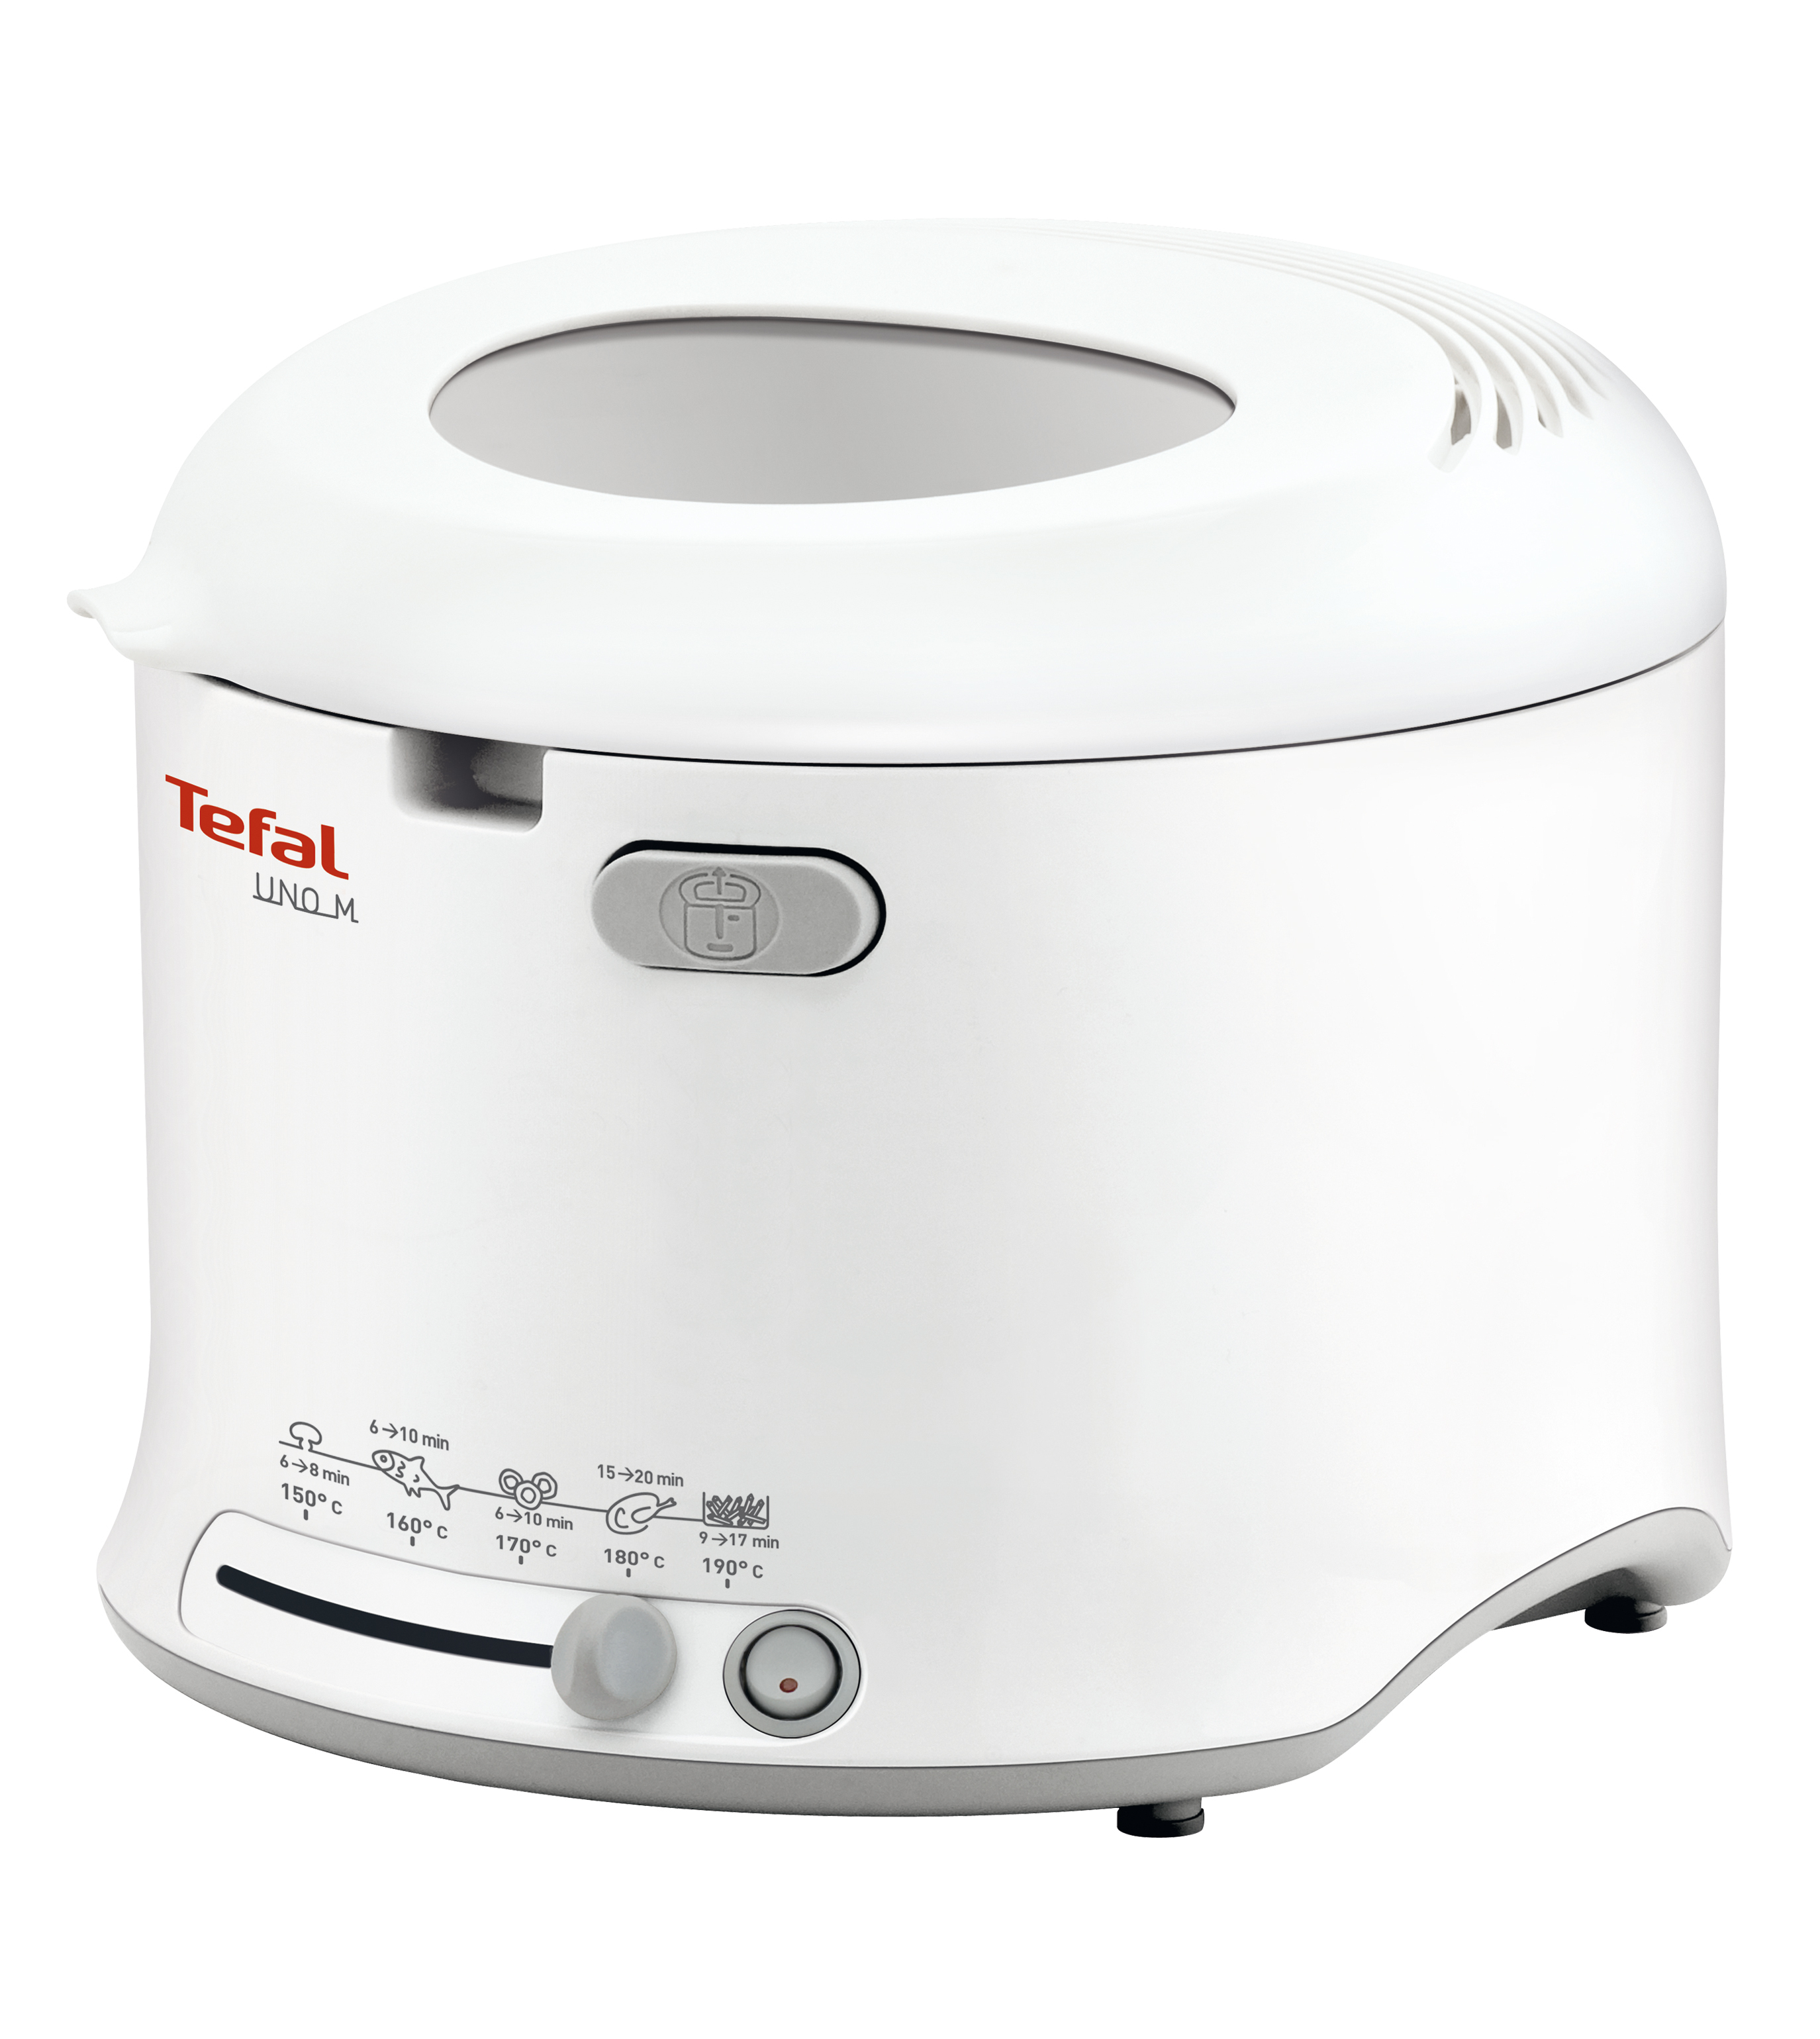 Tefal Friteuse Uno M wit FF1231